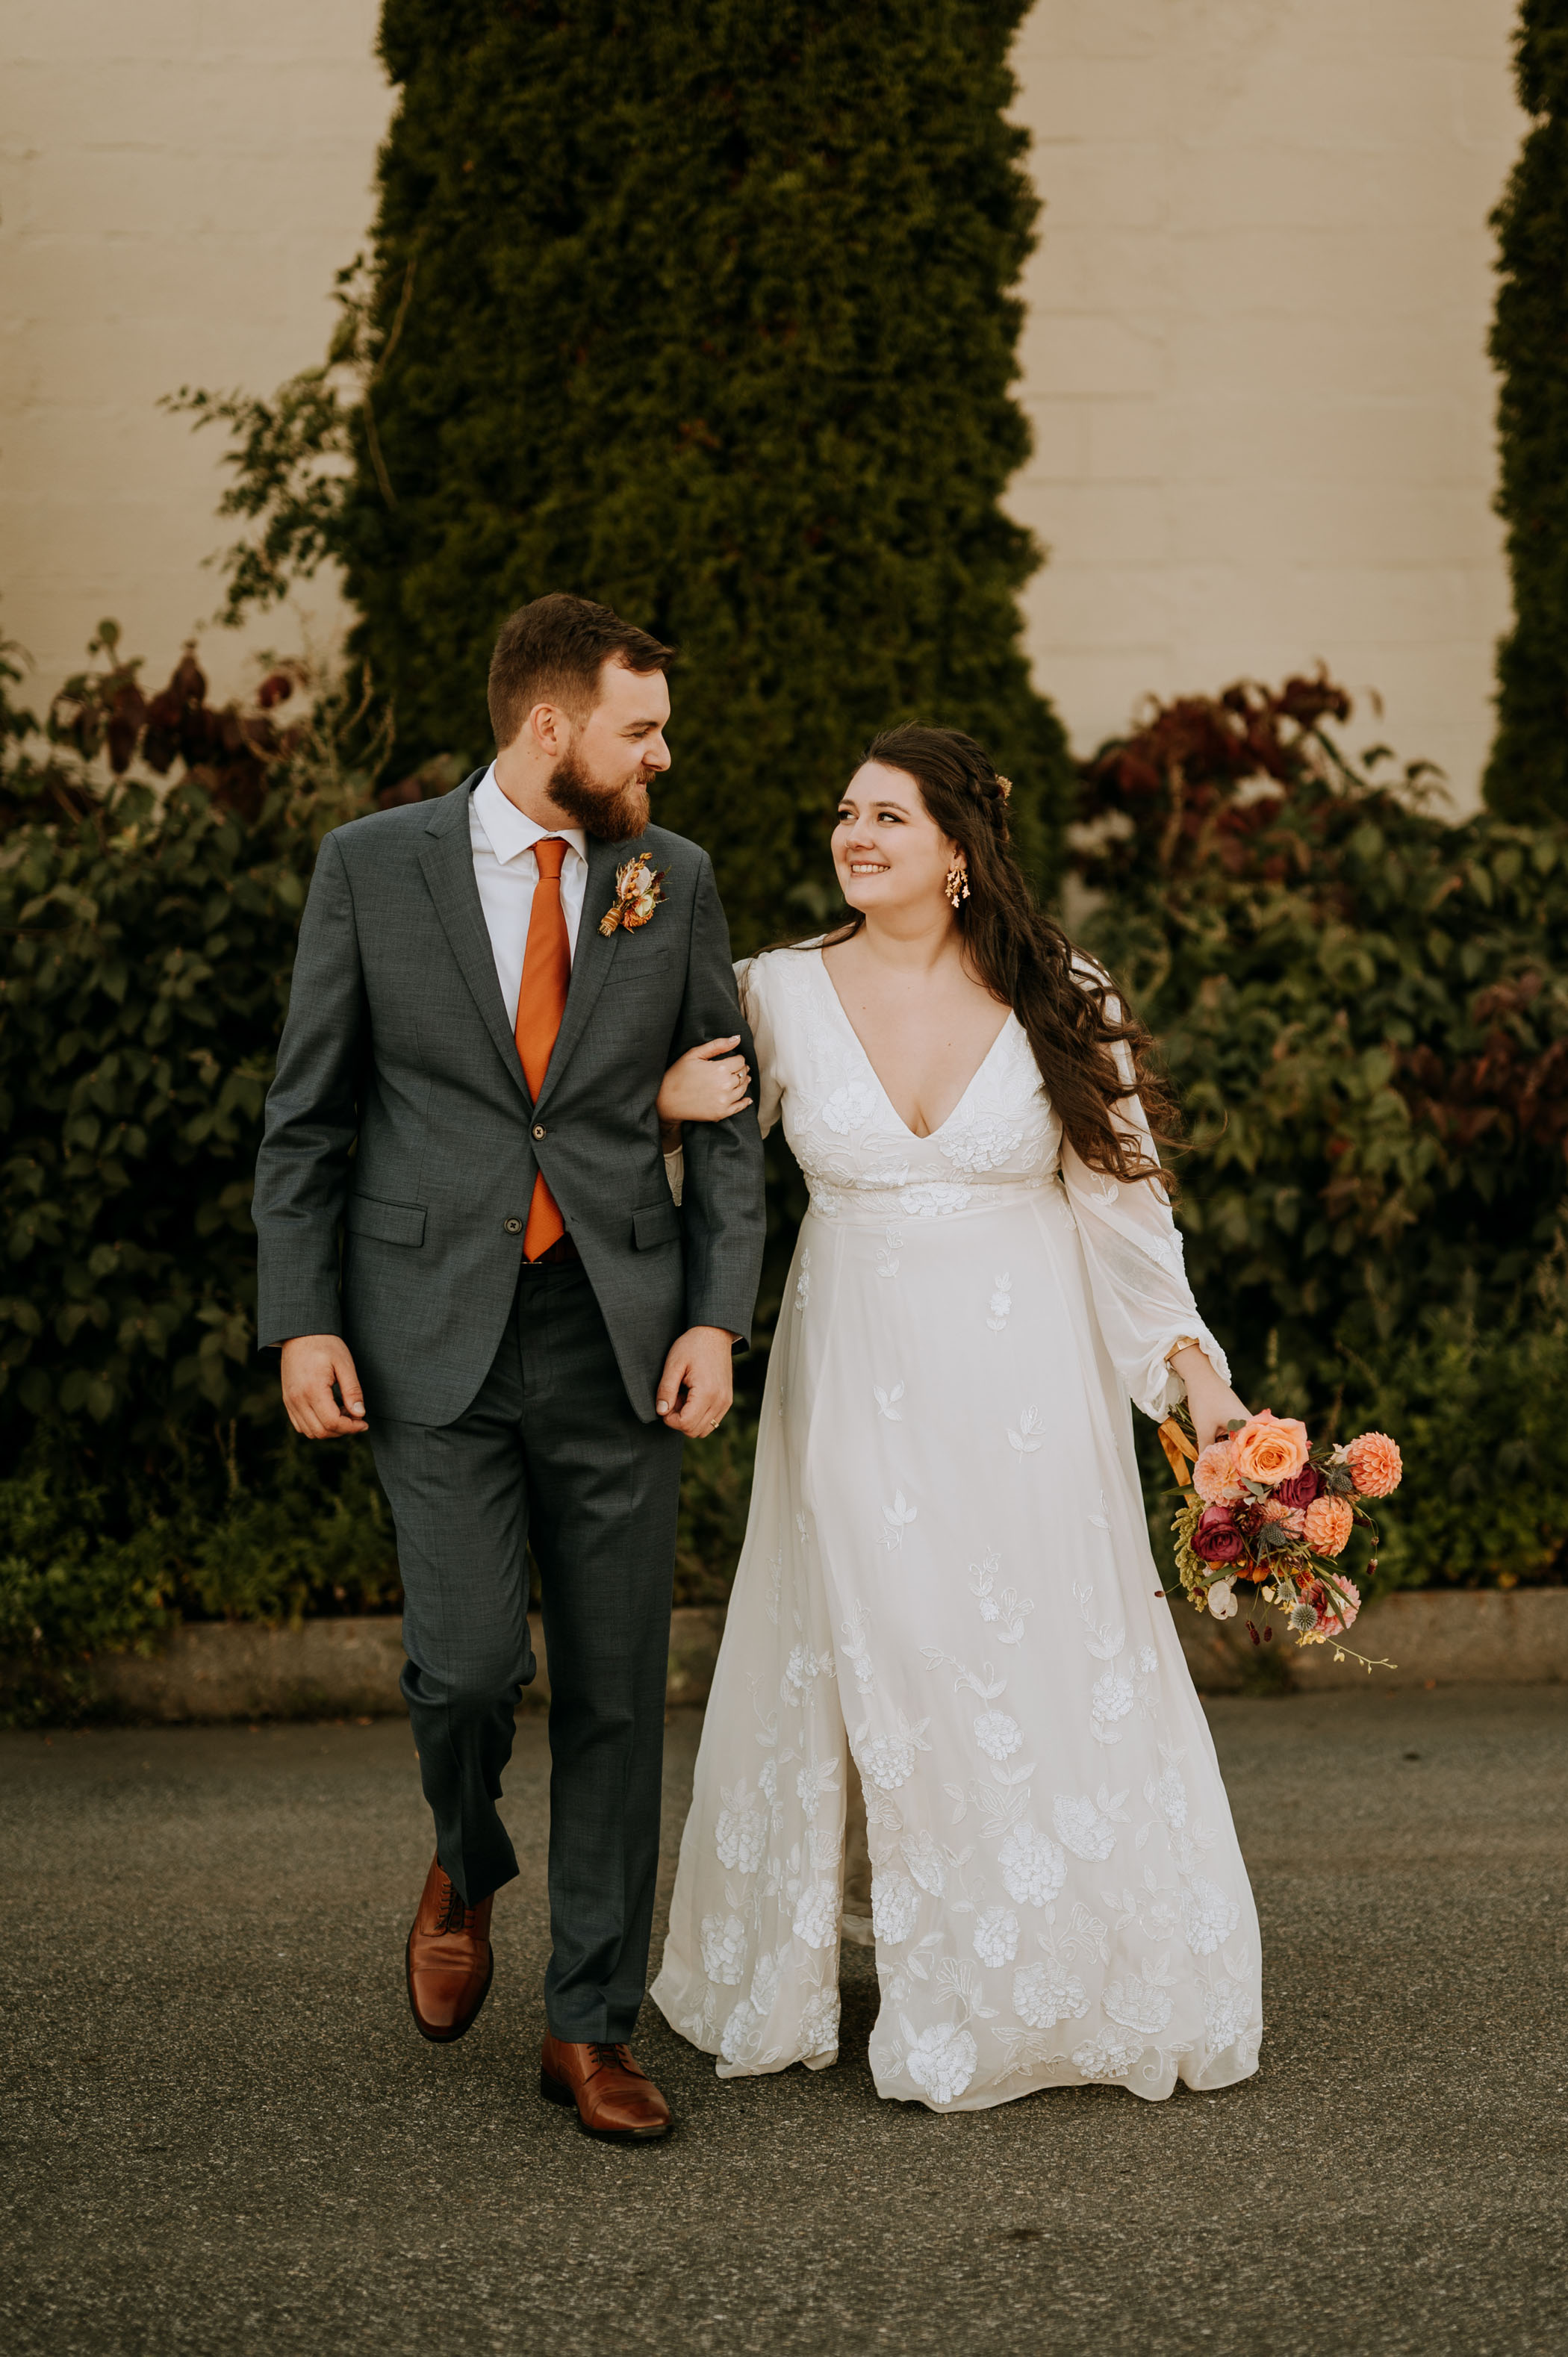 Maine is For Lovers: Funky Brewery Wedding in Portland Maine